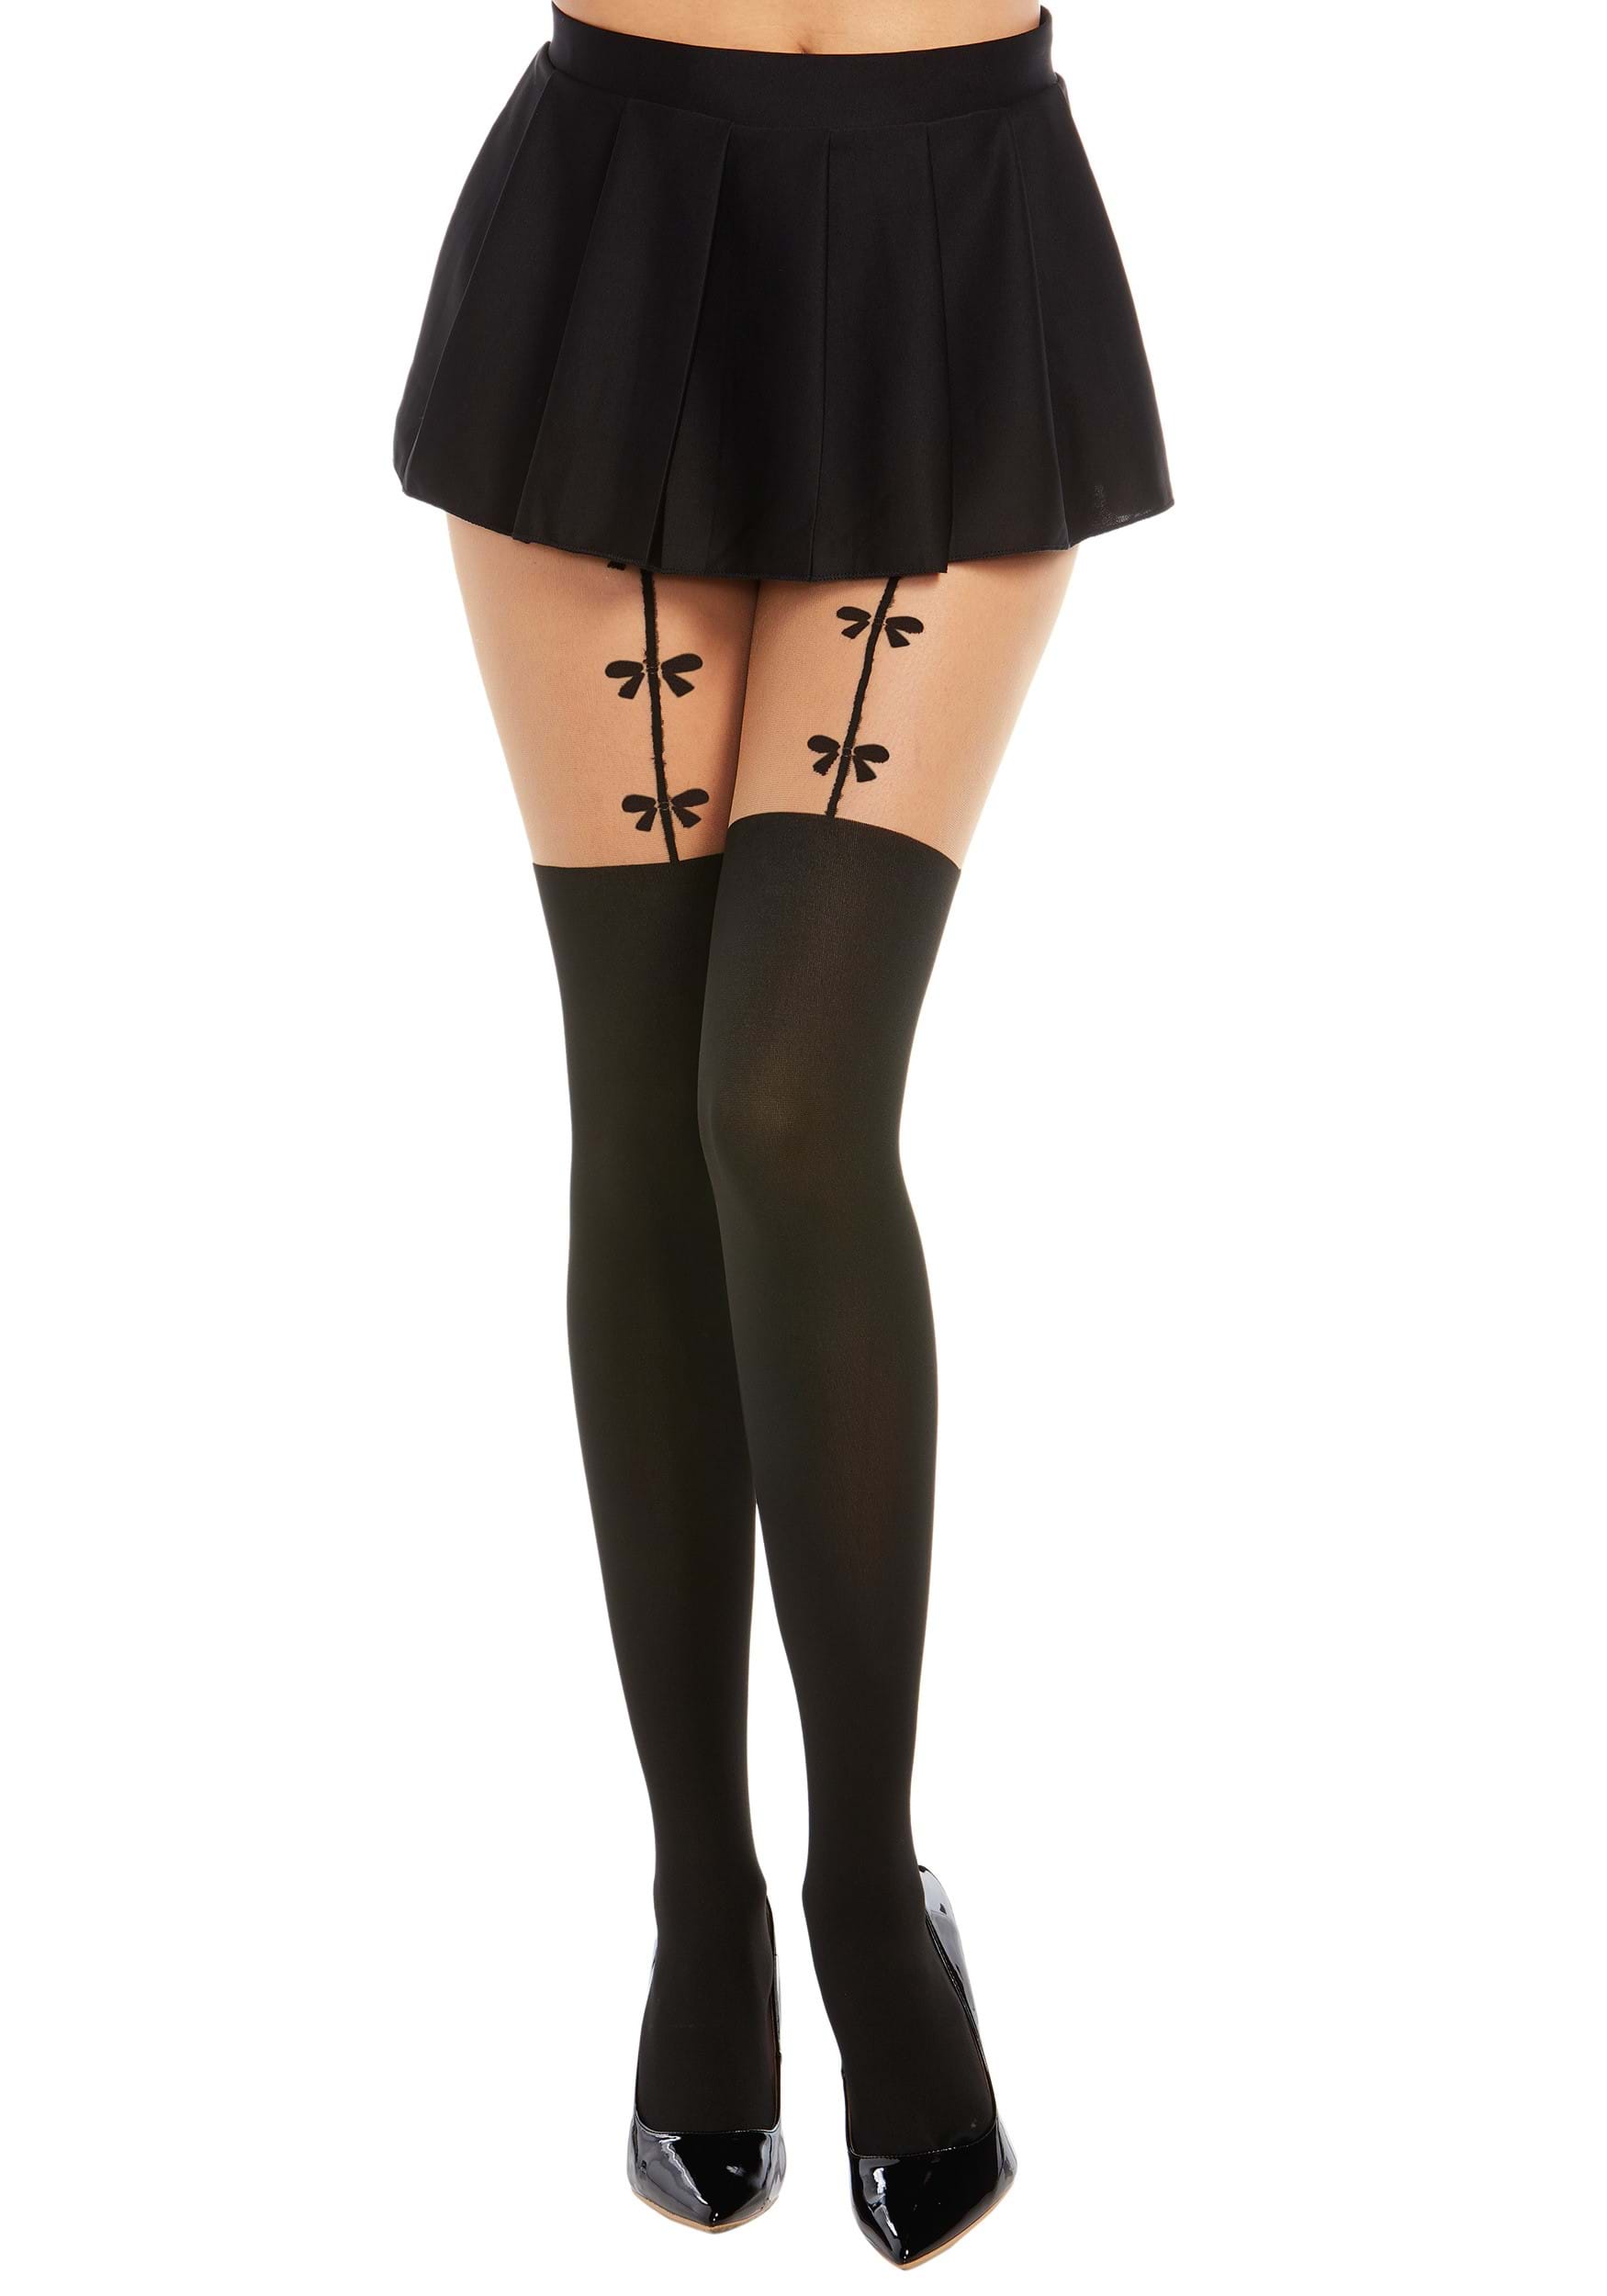 Women's Beige Pantyhose With Black Knitted Thigh High and Bow